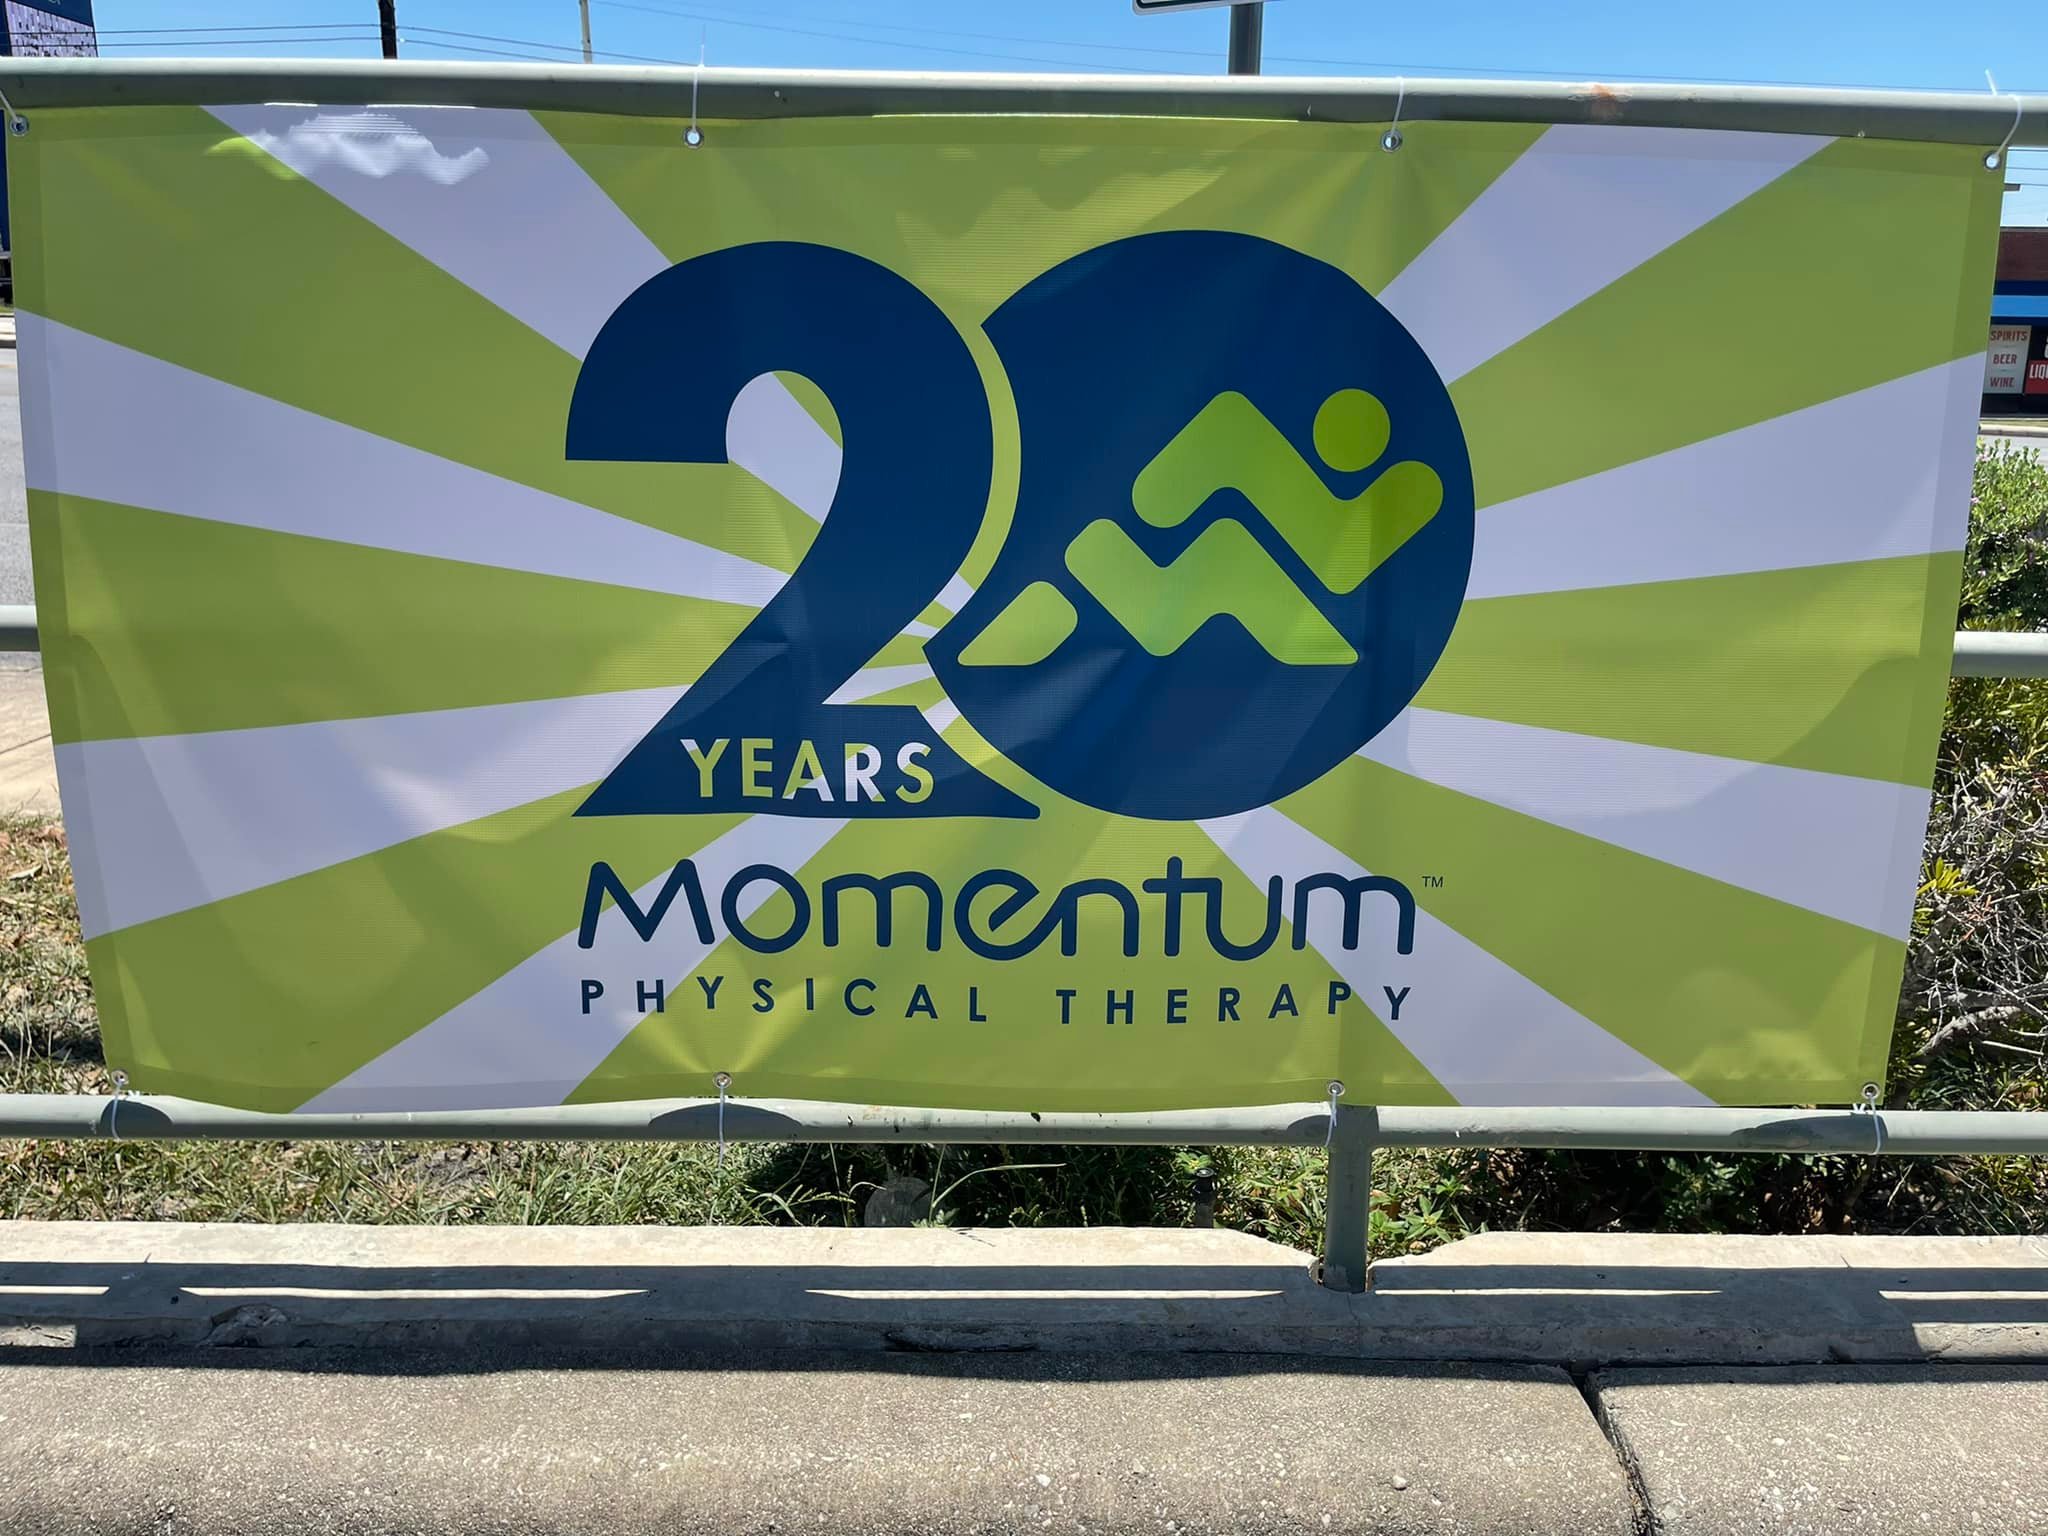 Banner celebrating 20 years of Momentum Physical Therapy